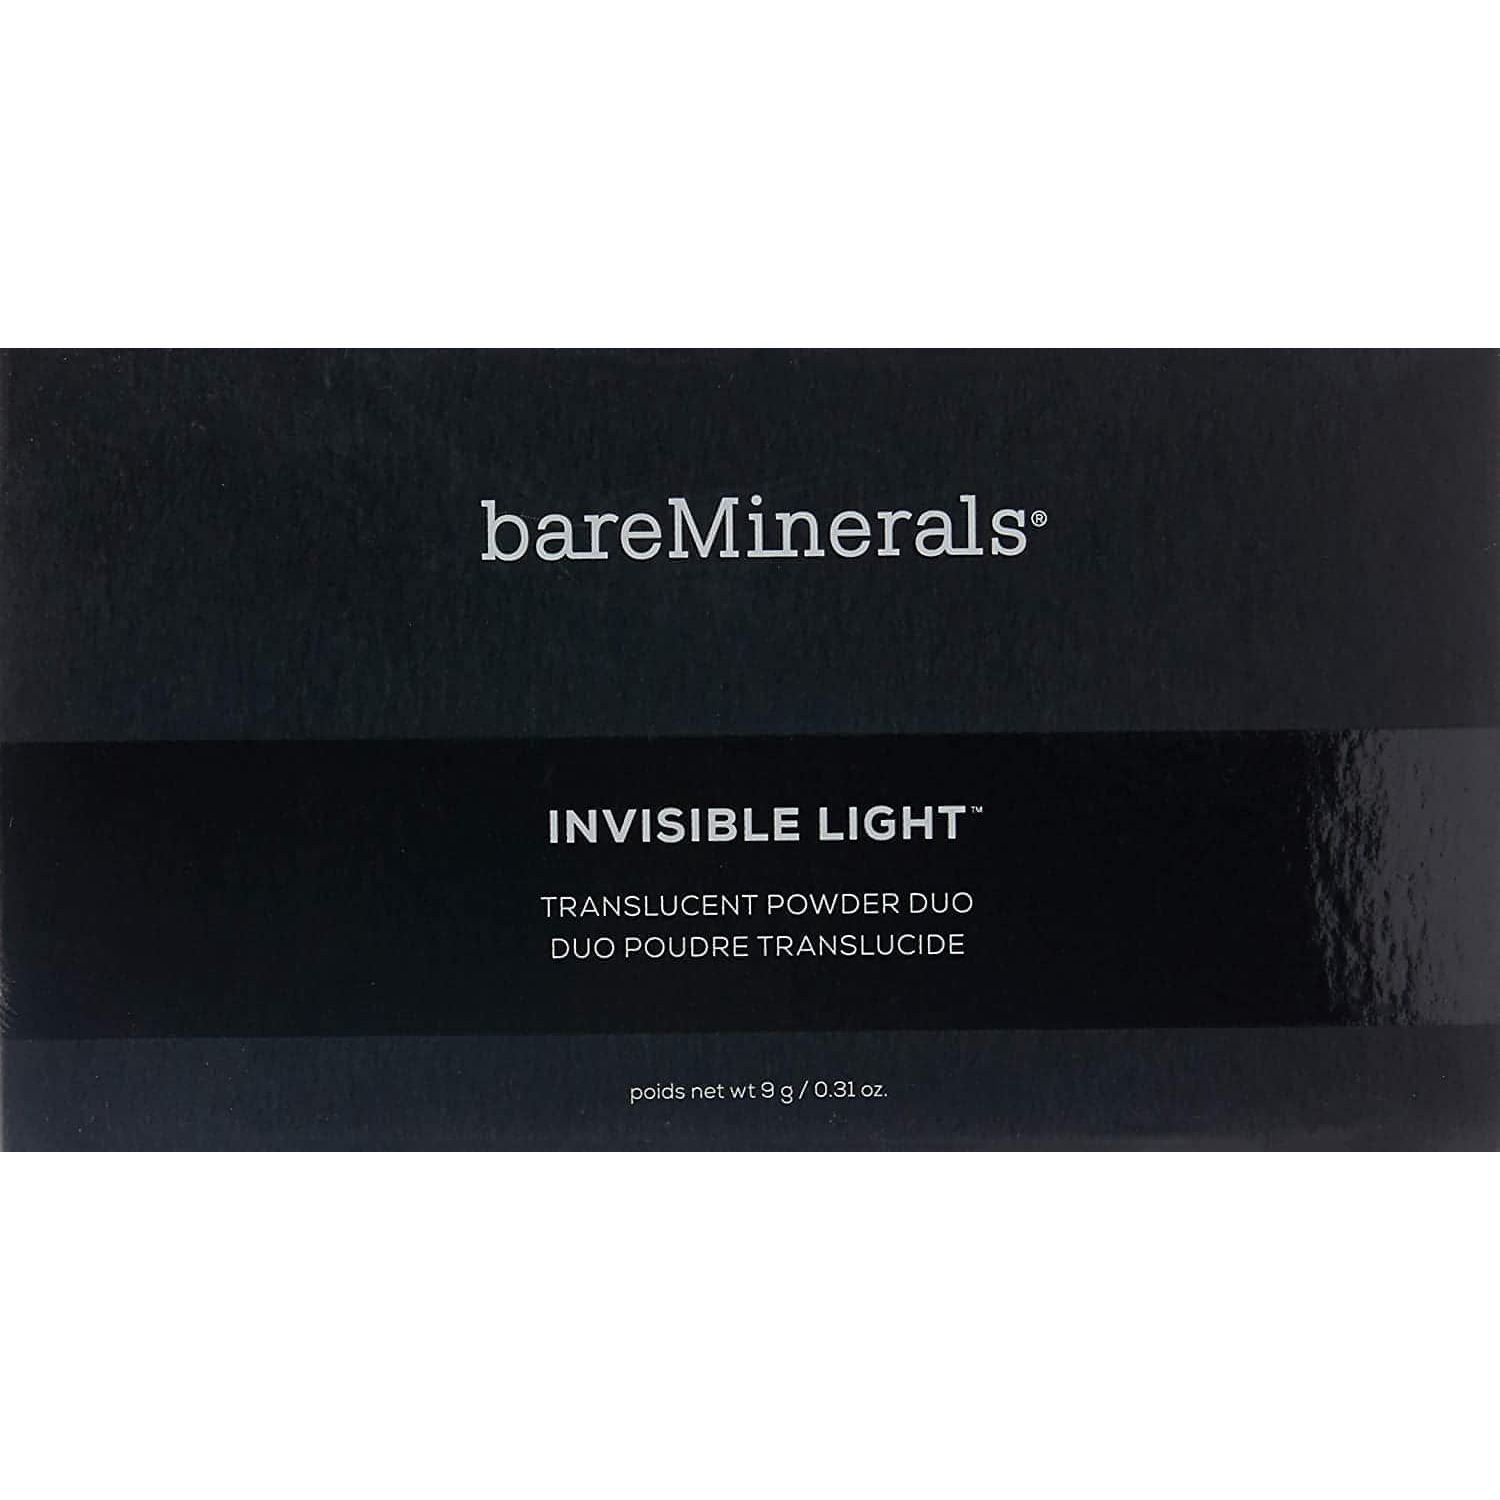 bareMinerals-BareMinerals Invisible Light Translucent Powder Duo for Women - 0.31 oz (10g) - Brandat Outlet